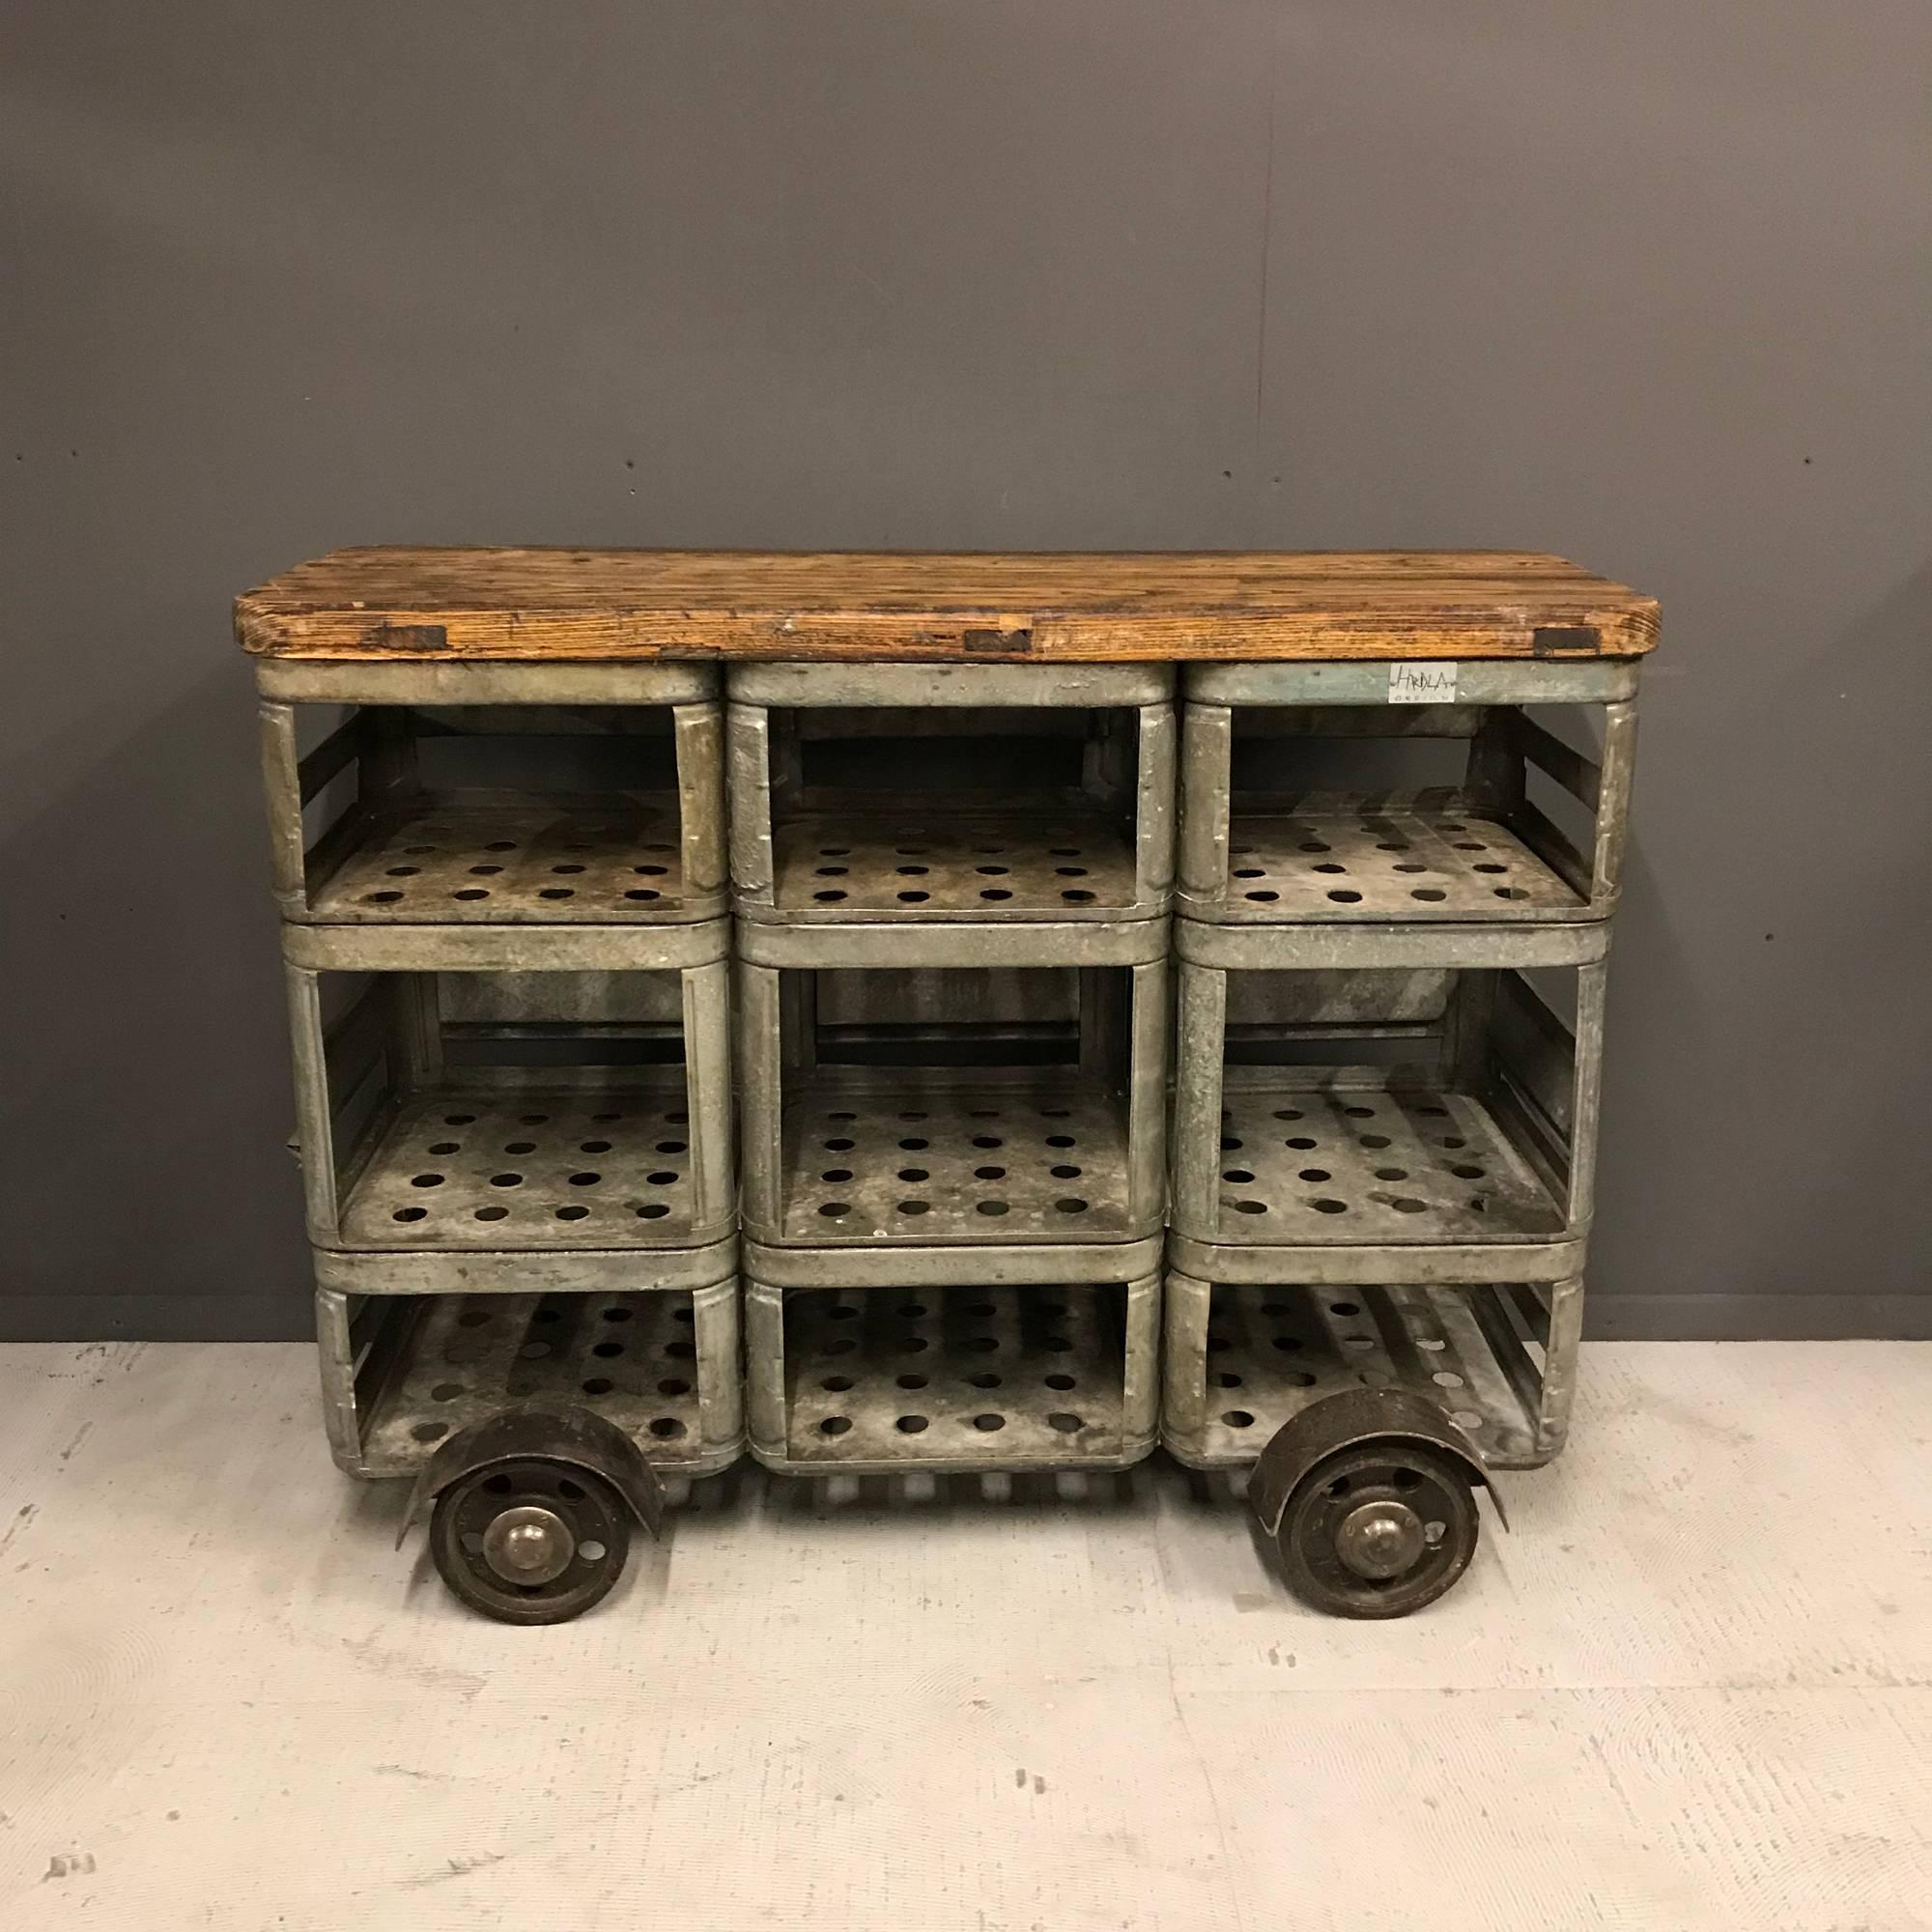 Industrial shelving unit by Hrdla Design. Made of old zinc crates used in the 1960s for soda and milk bottles.